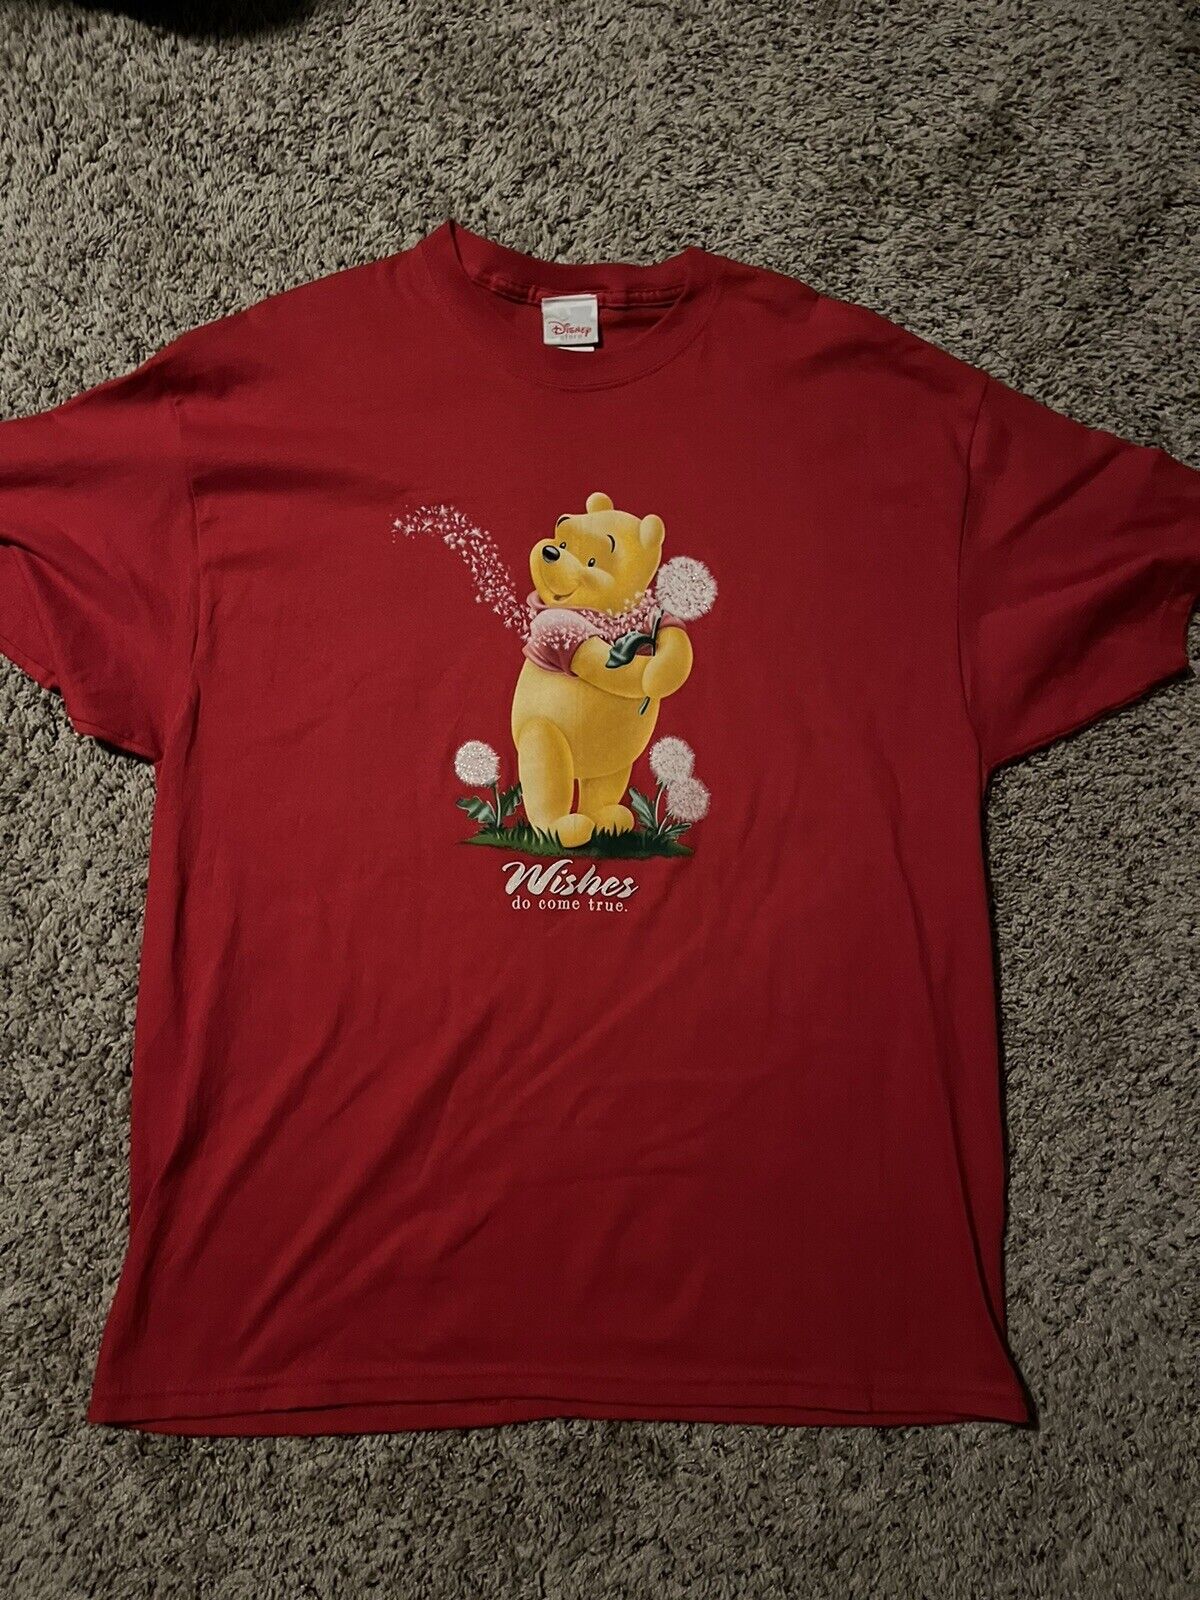 Vintage Men’s XL Disney Store Winnie The Pooh T-Shrit Wishes Do Come True Red